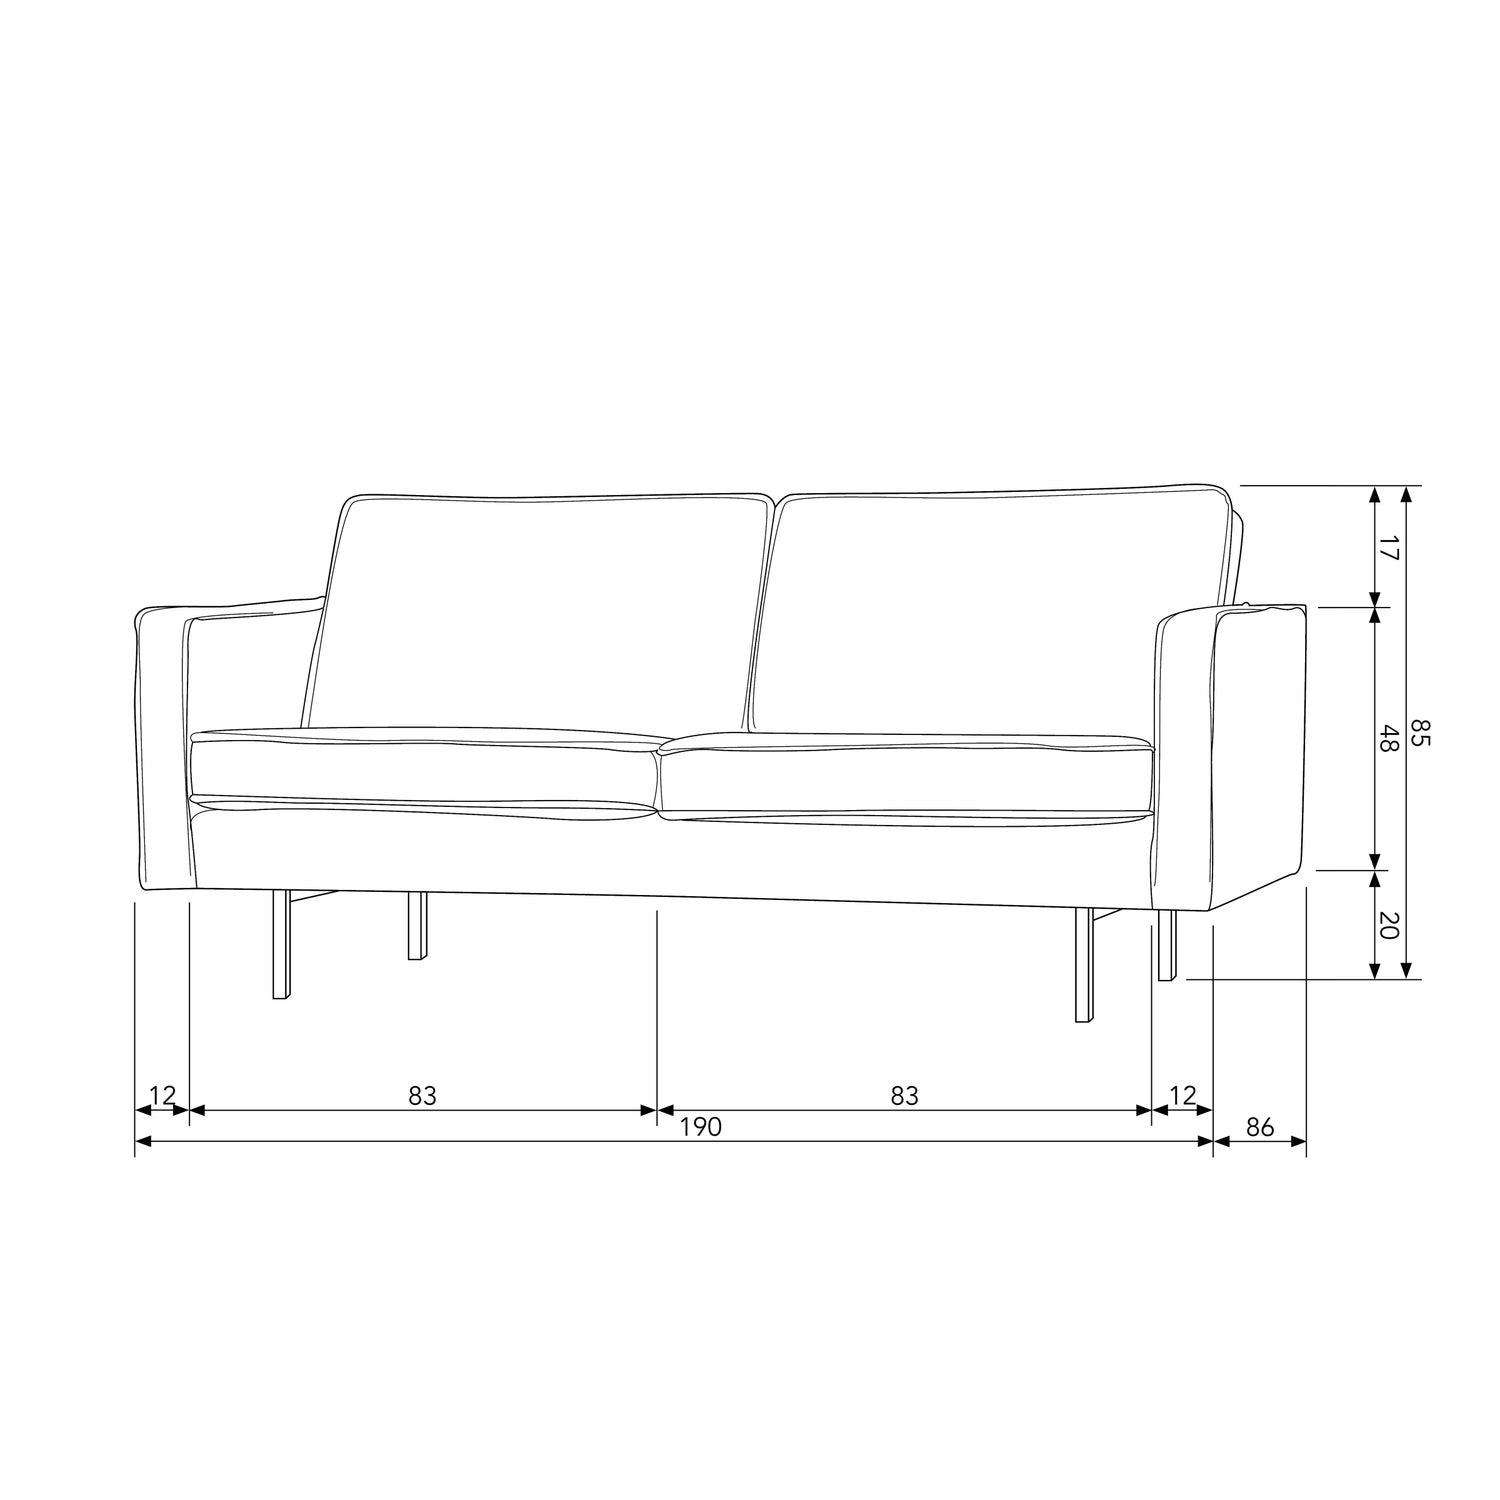 800542-NA-G-79-53-45-206-205-198-162-156-14-132-126-12-105-50_BT_Rodeo_25-seater_sofa.jpg?auto=webp&format=png&width=2000&height=2000